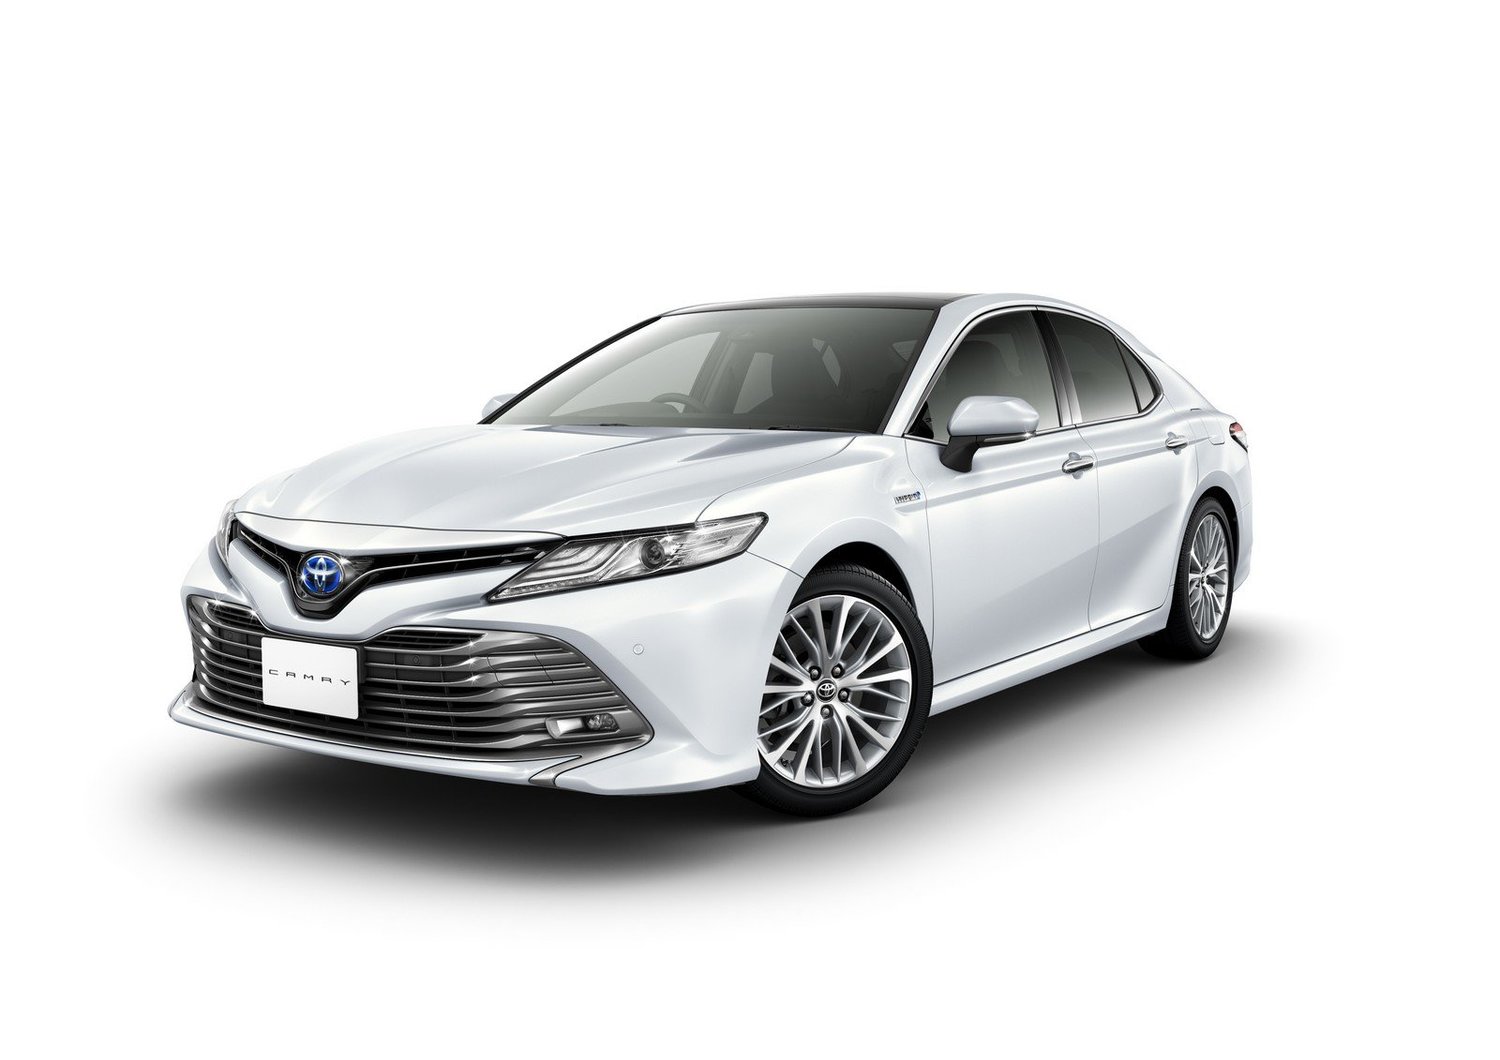 <span style="font-weight: bold;">TOYOTA CAMRY</span>